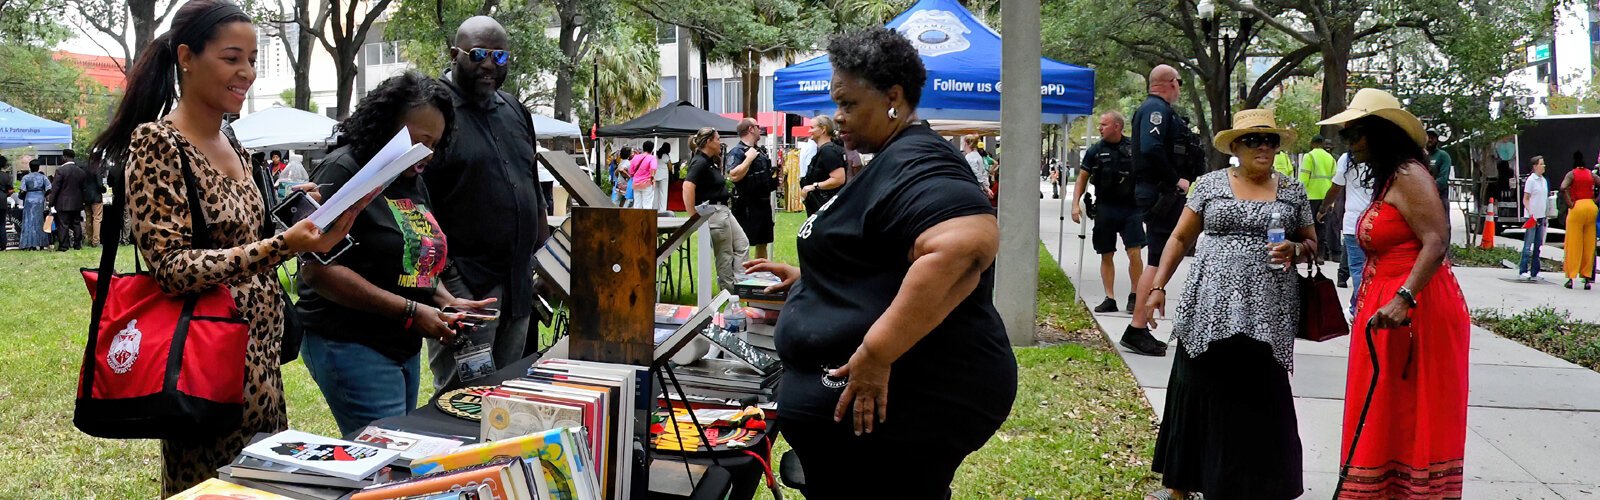 Following the Juneteenth flag-raising ceremony, a celebratory festival including local vendors, non-profit organizations, artists and musicians took place at Lykes Gaslight Park, across from Old City Hall in Tampa.